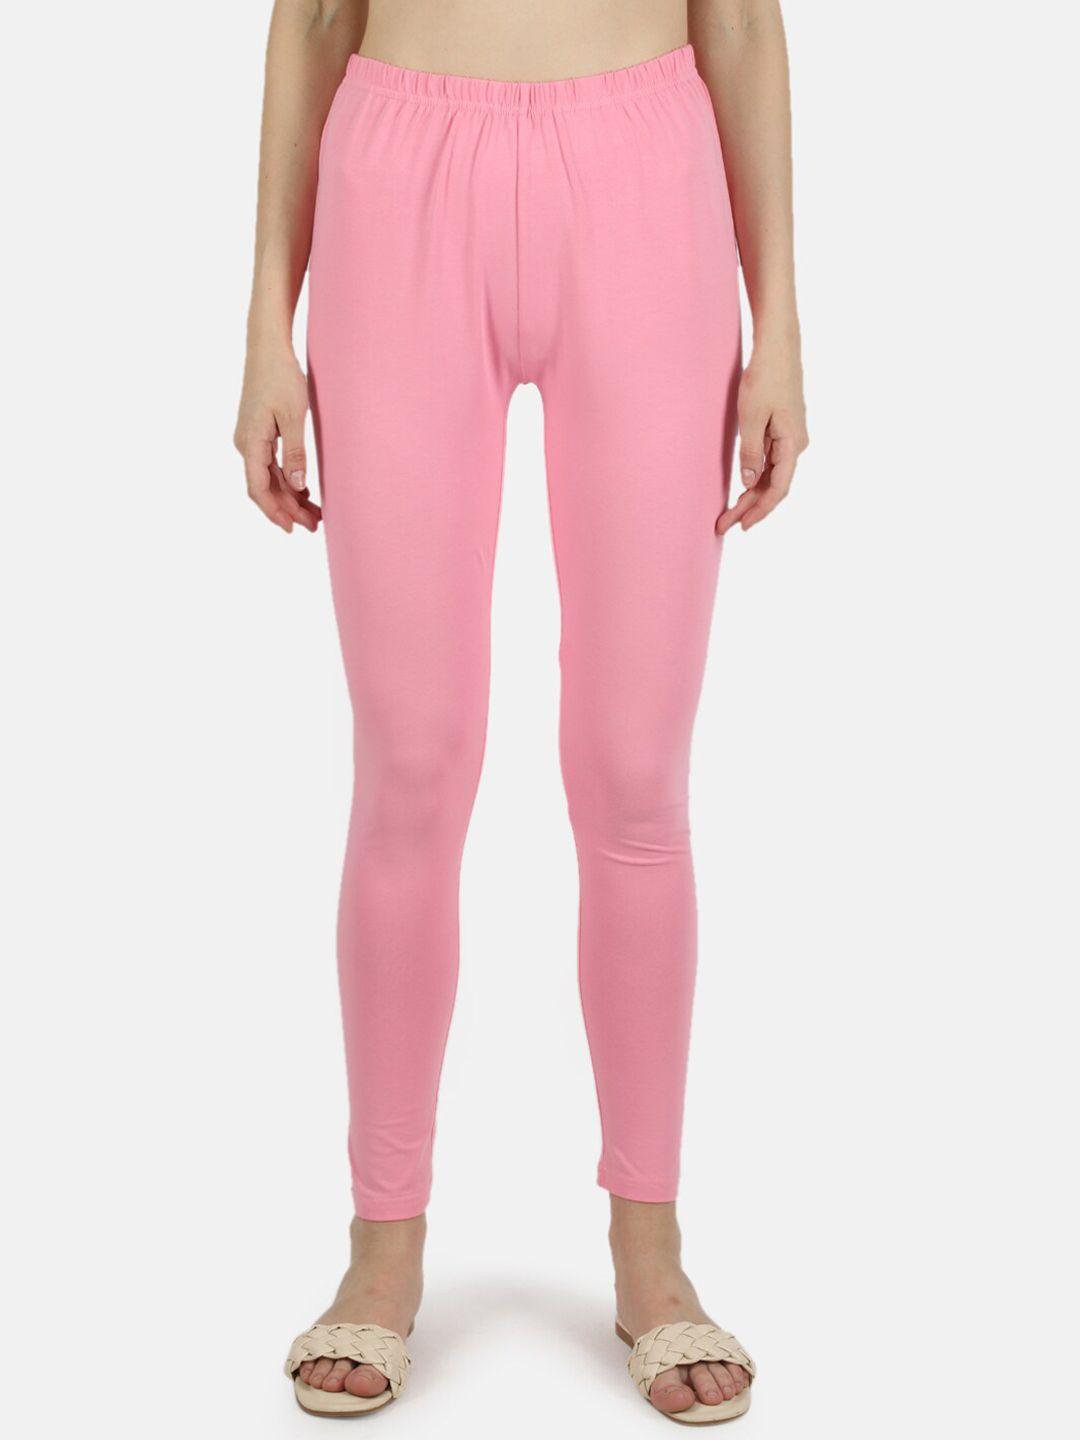 monte-carlo-women-pink-solid-ankle-length-leggings